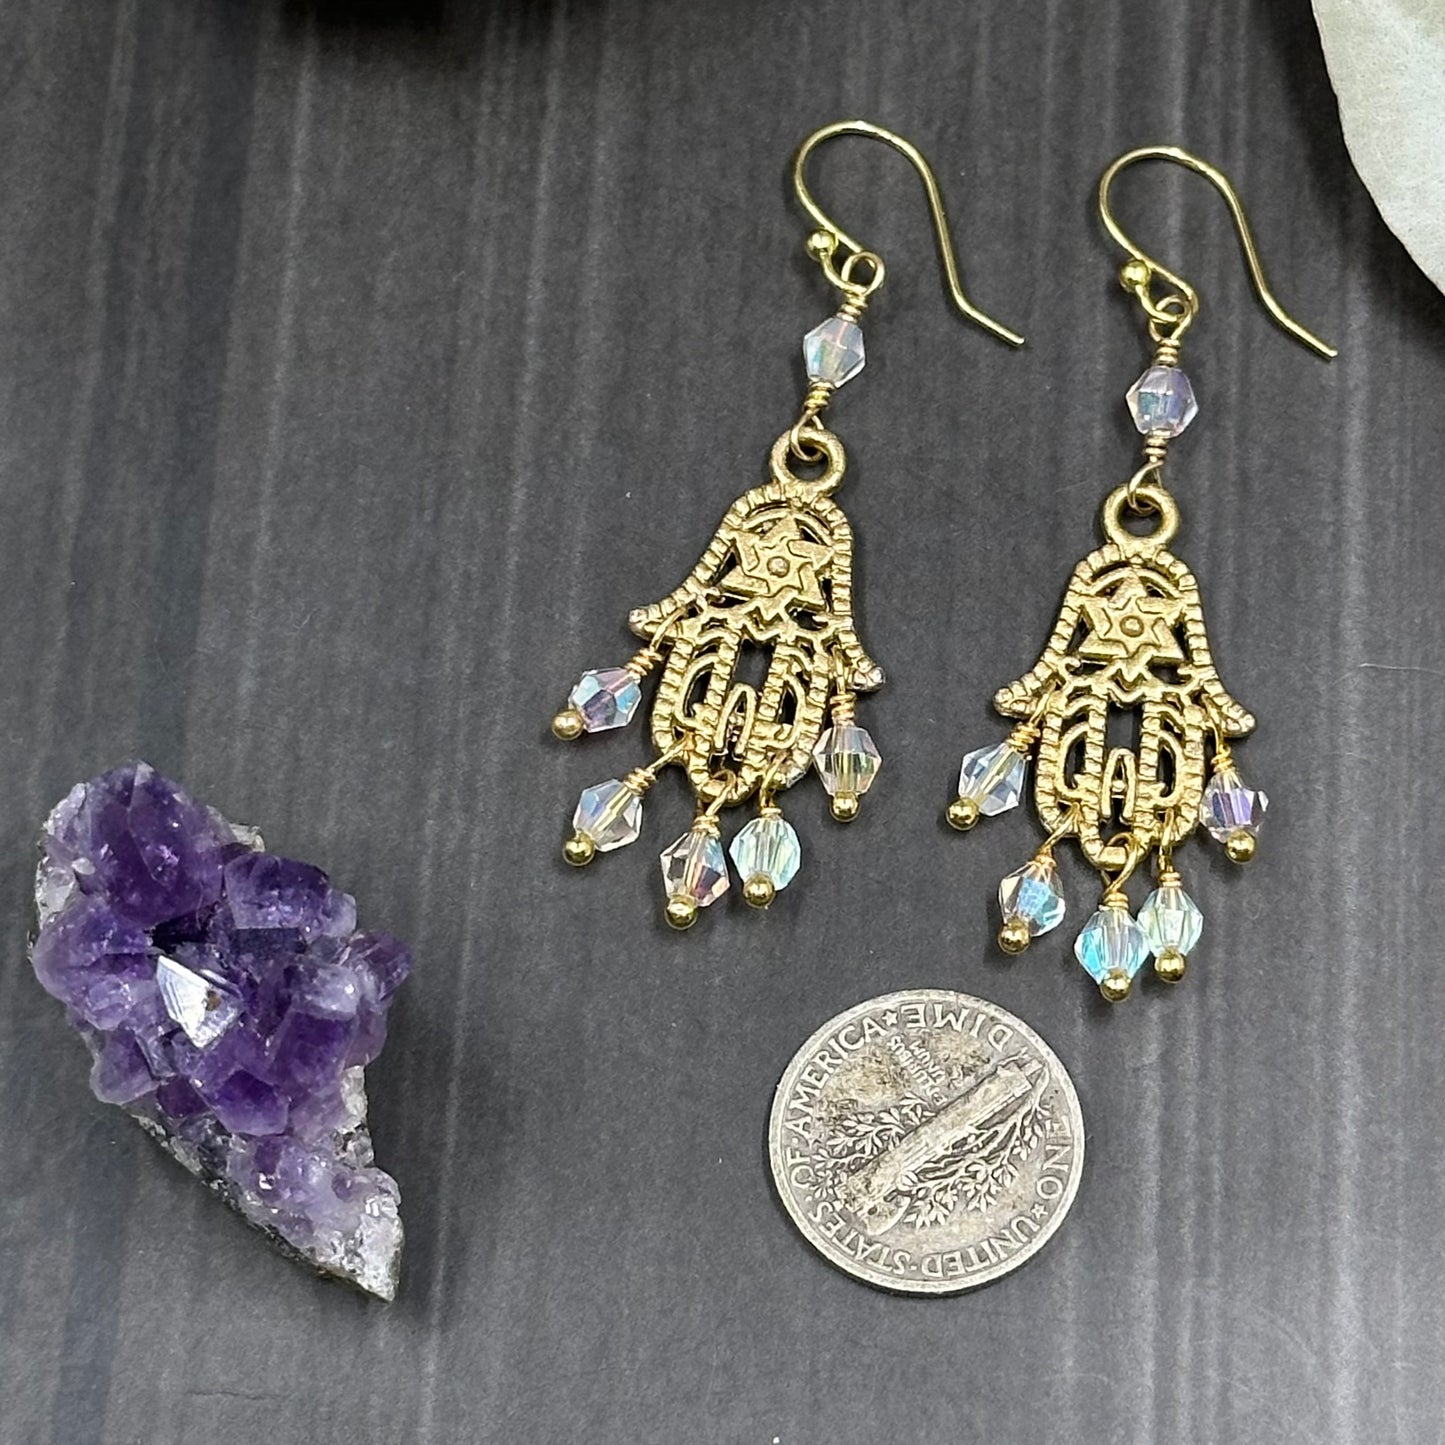 Gold Colored Hamsa Earrings with Glass Crystals